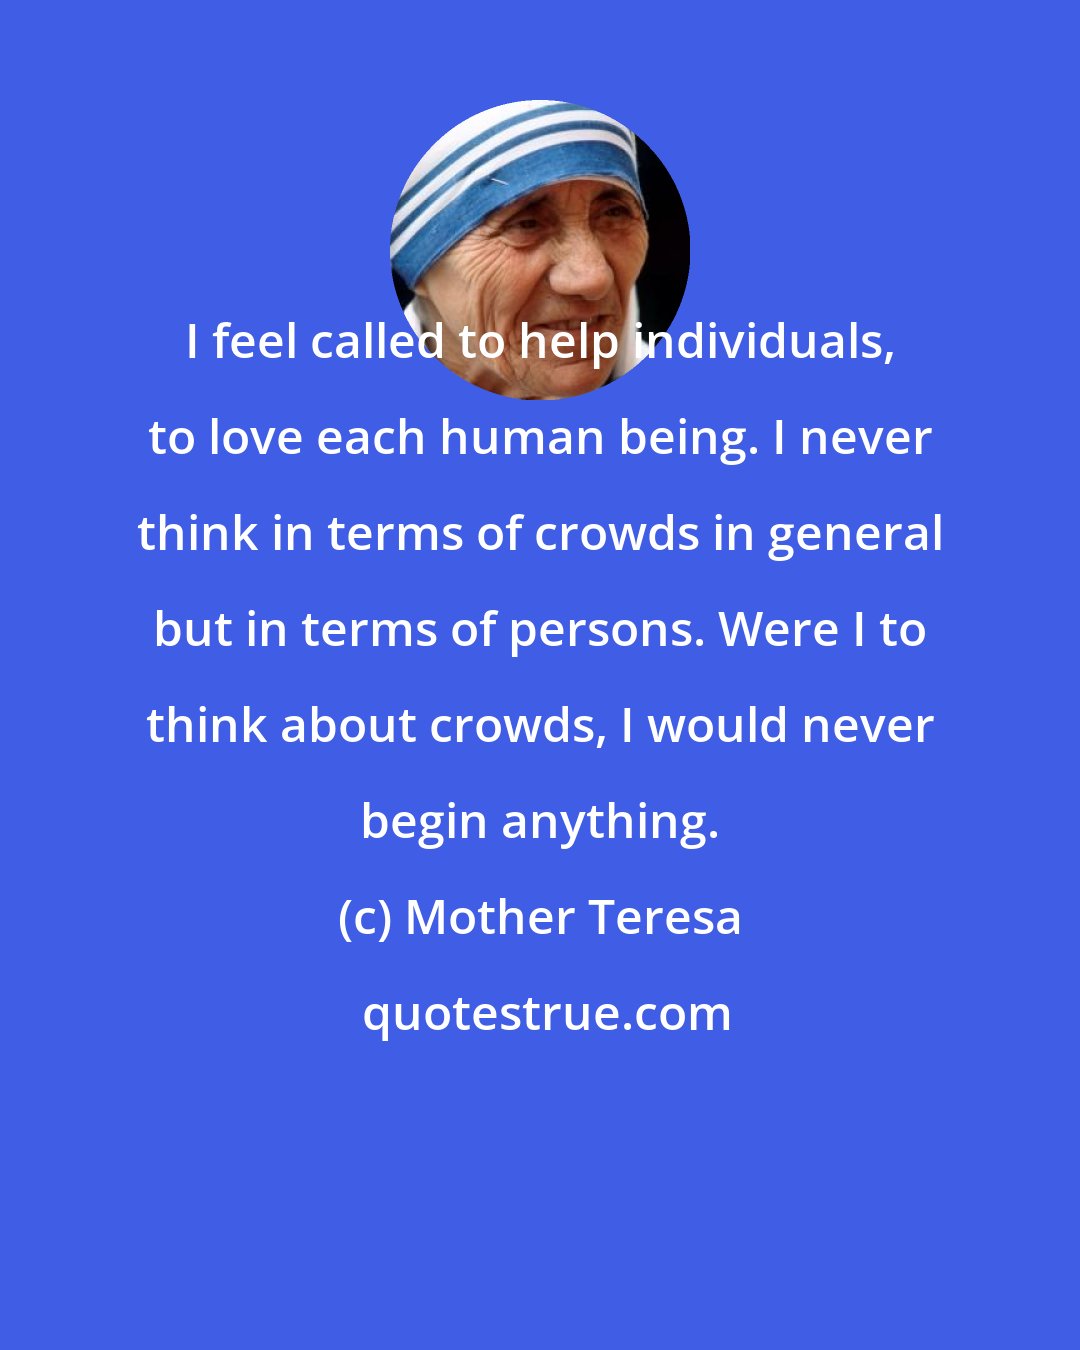 Mother Teresa: I feel called to help individuals, to love each human being. I never think in terms of crowds in general but in terms of persons. Were I to think about crowds, I would never begin anything.